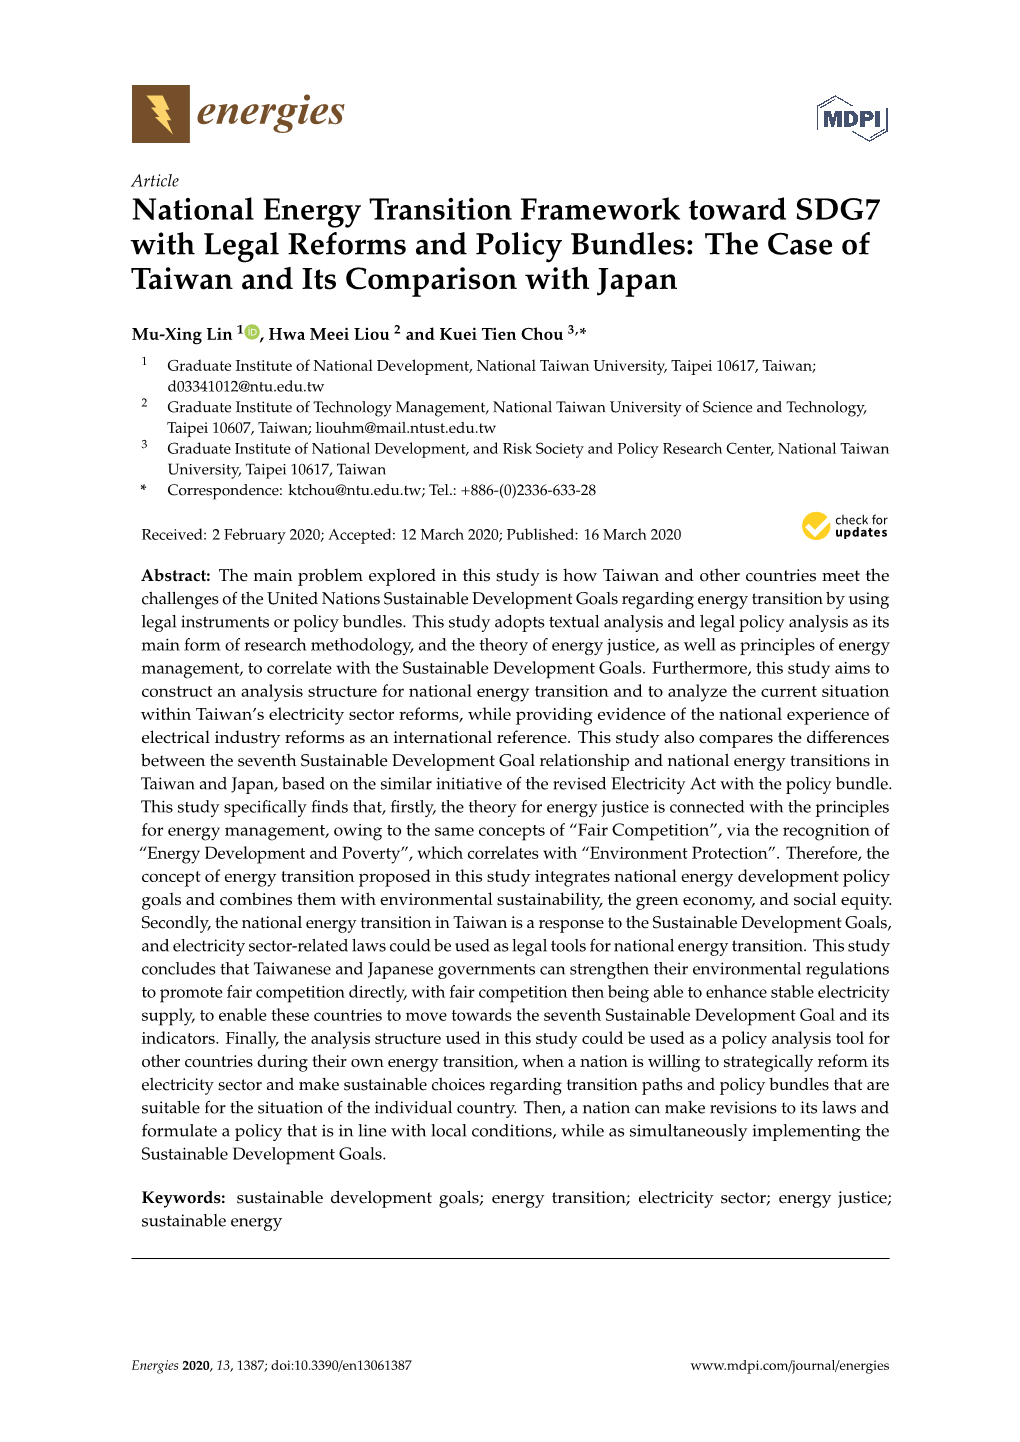 National Energy Transition Framework Toward SDG7 with Legal Reforms and Policy Bundles: the Case of Taiwan and Its Comparison with Japan